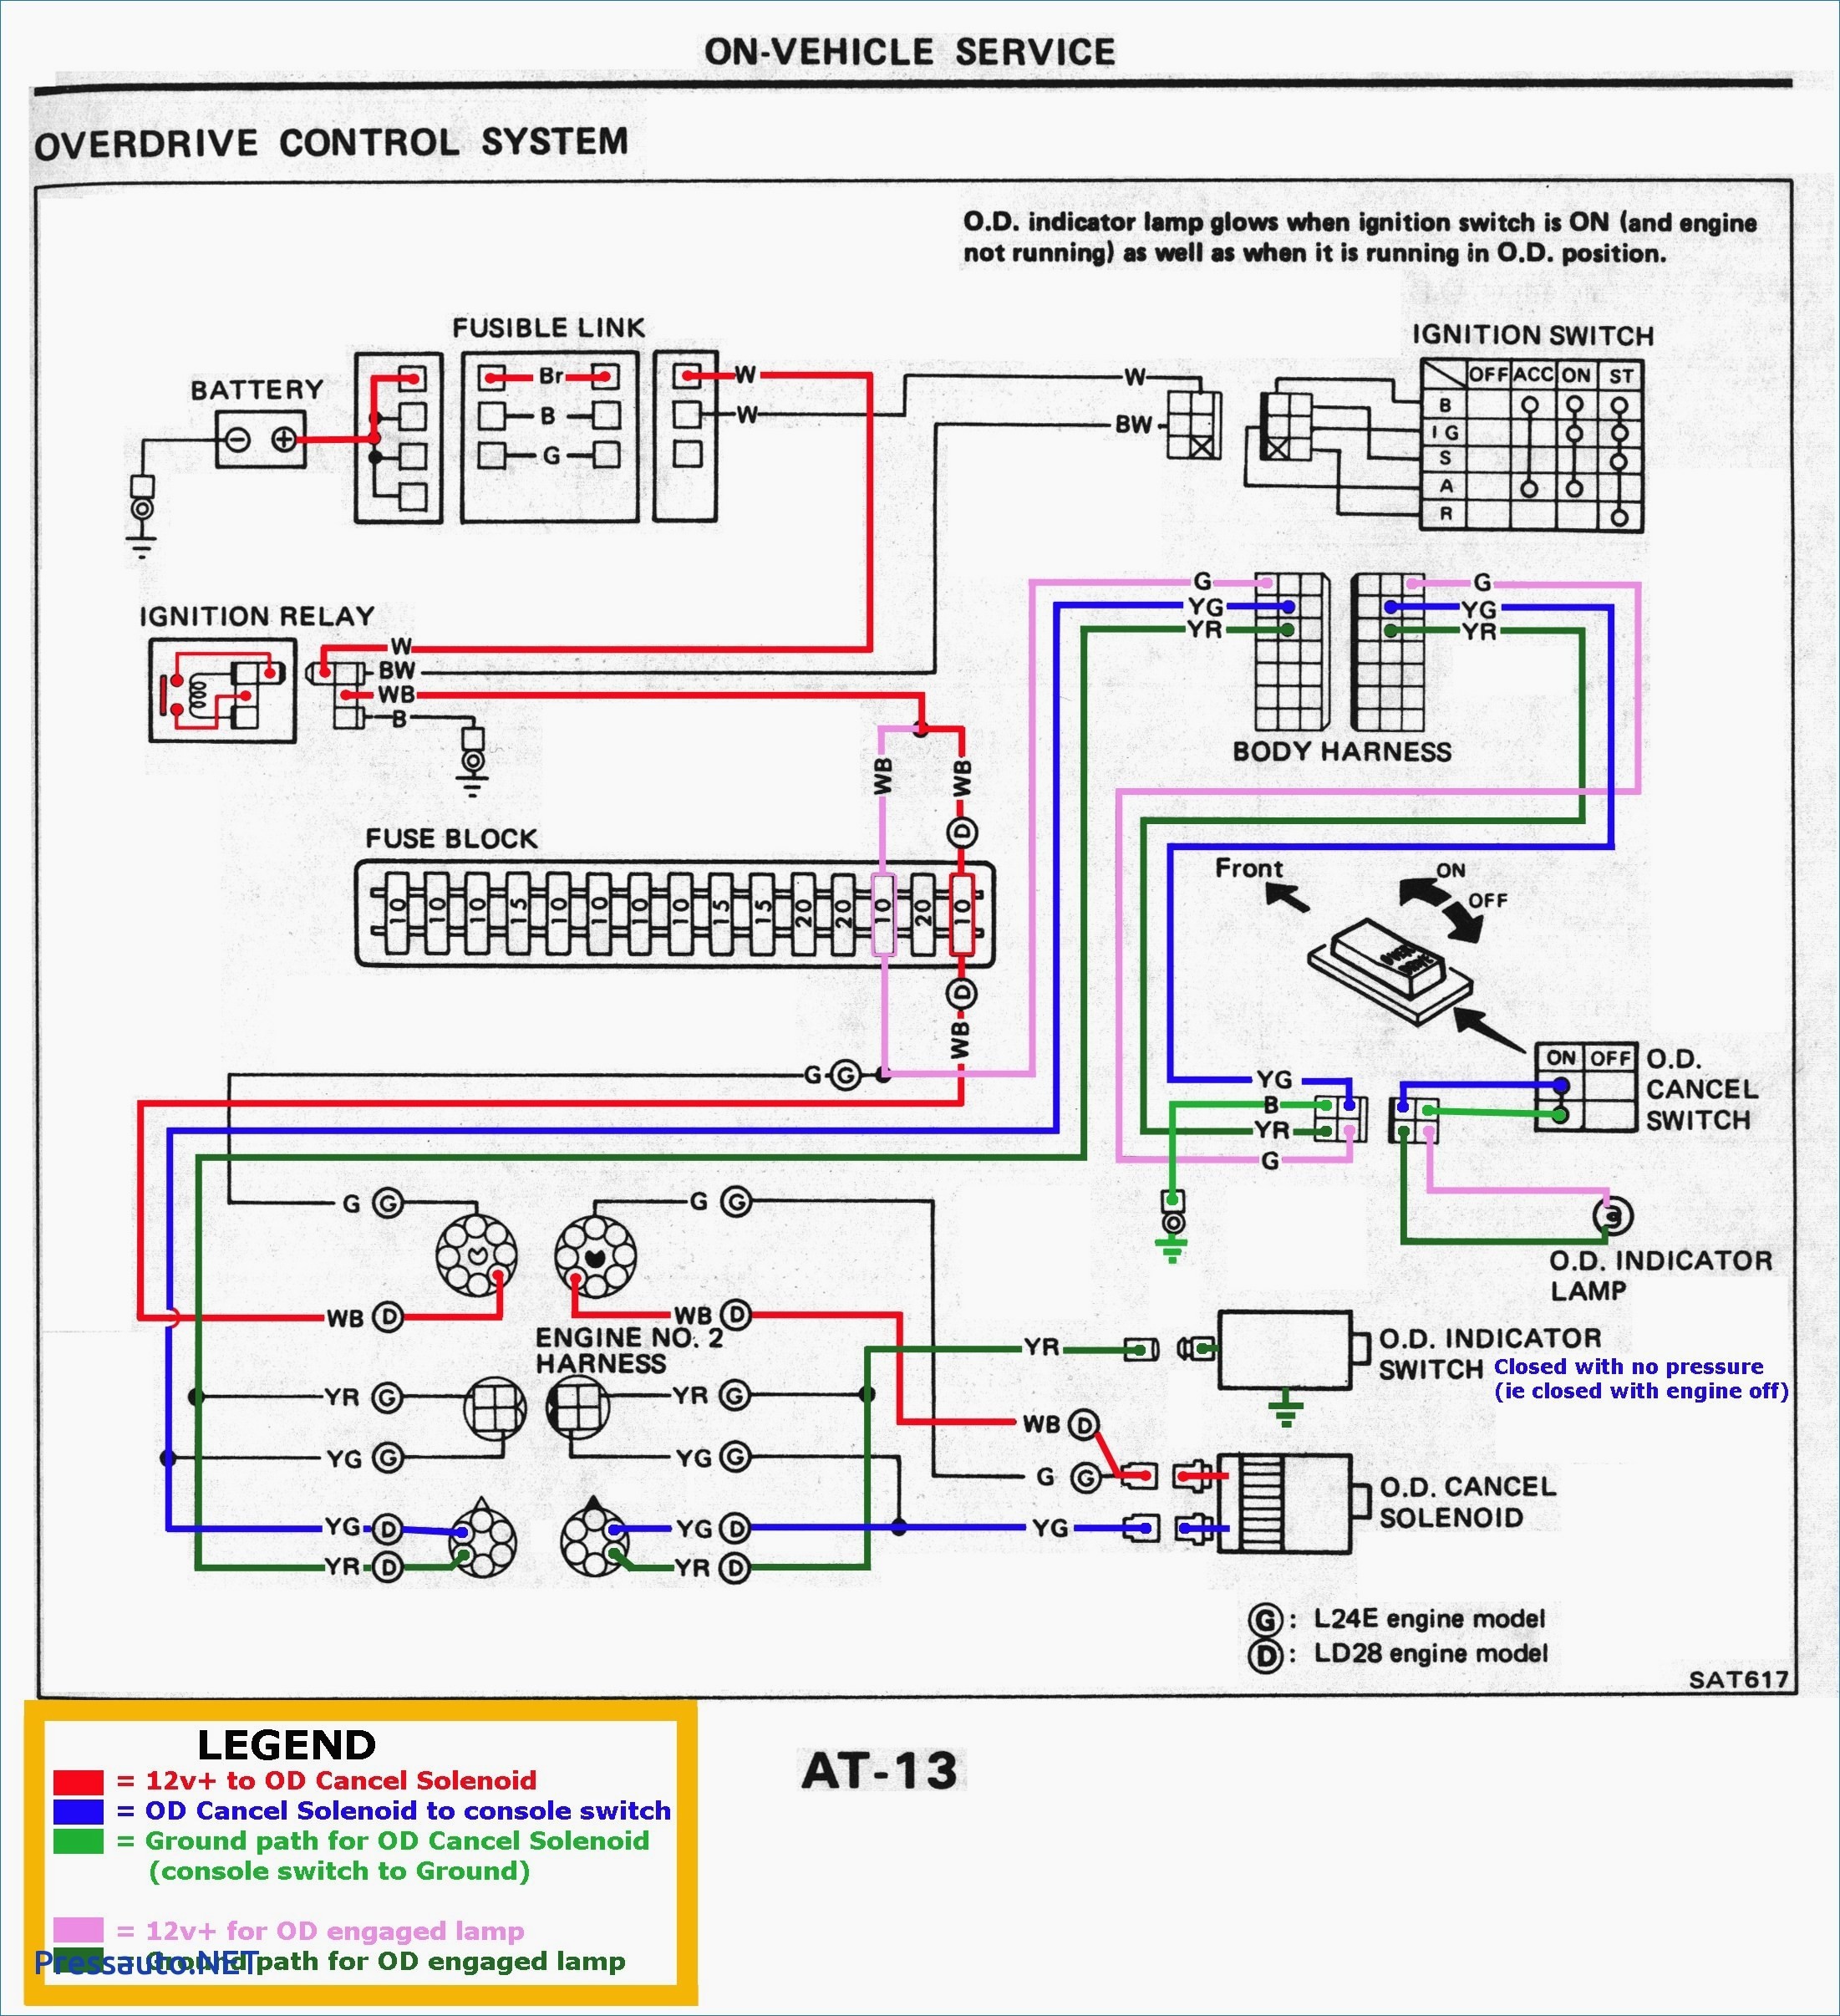 Wiring Diagram for Automotive Voltmeter Inspirational Automotive Wiring Diagram Practice Refrence Basic Electrical Wiring